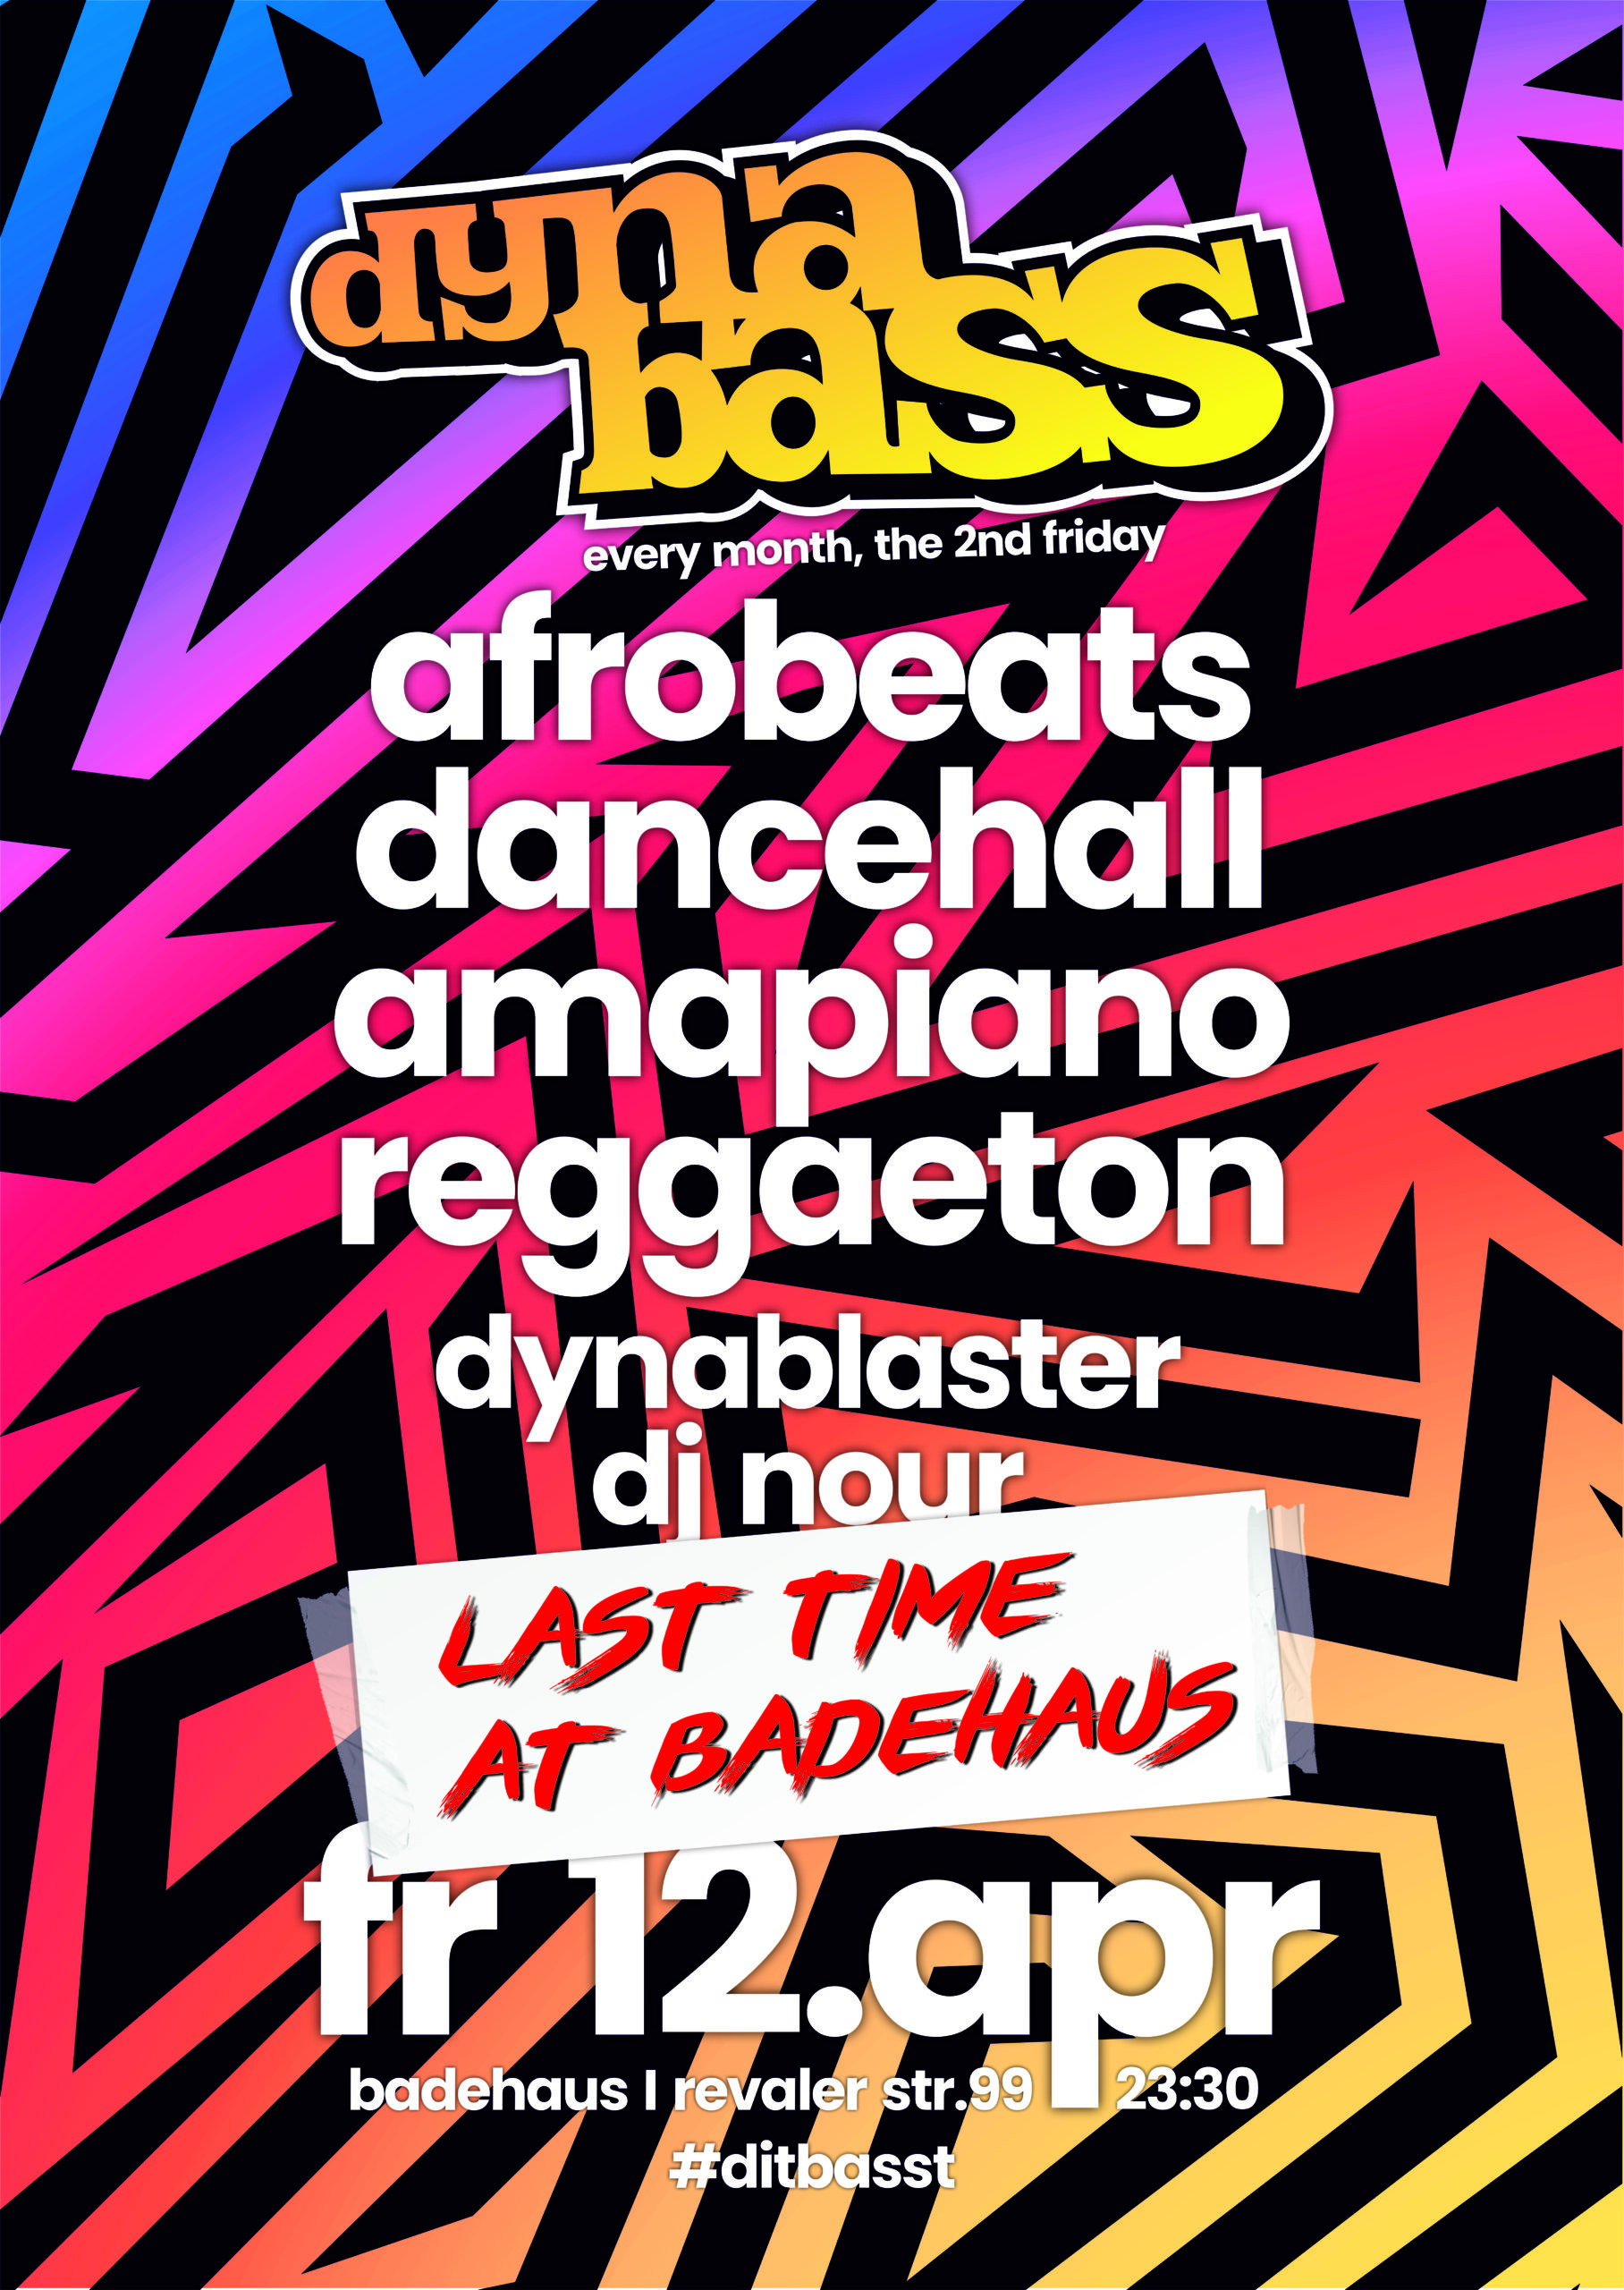 DYNABASS - Last Dance im Badehaus -  the Dancehall, Afrobeats, Amapiano and BassHall Party in Berlin